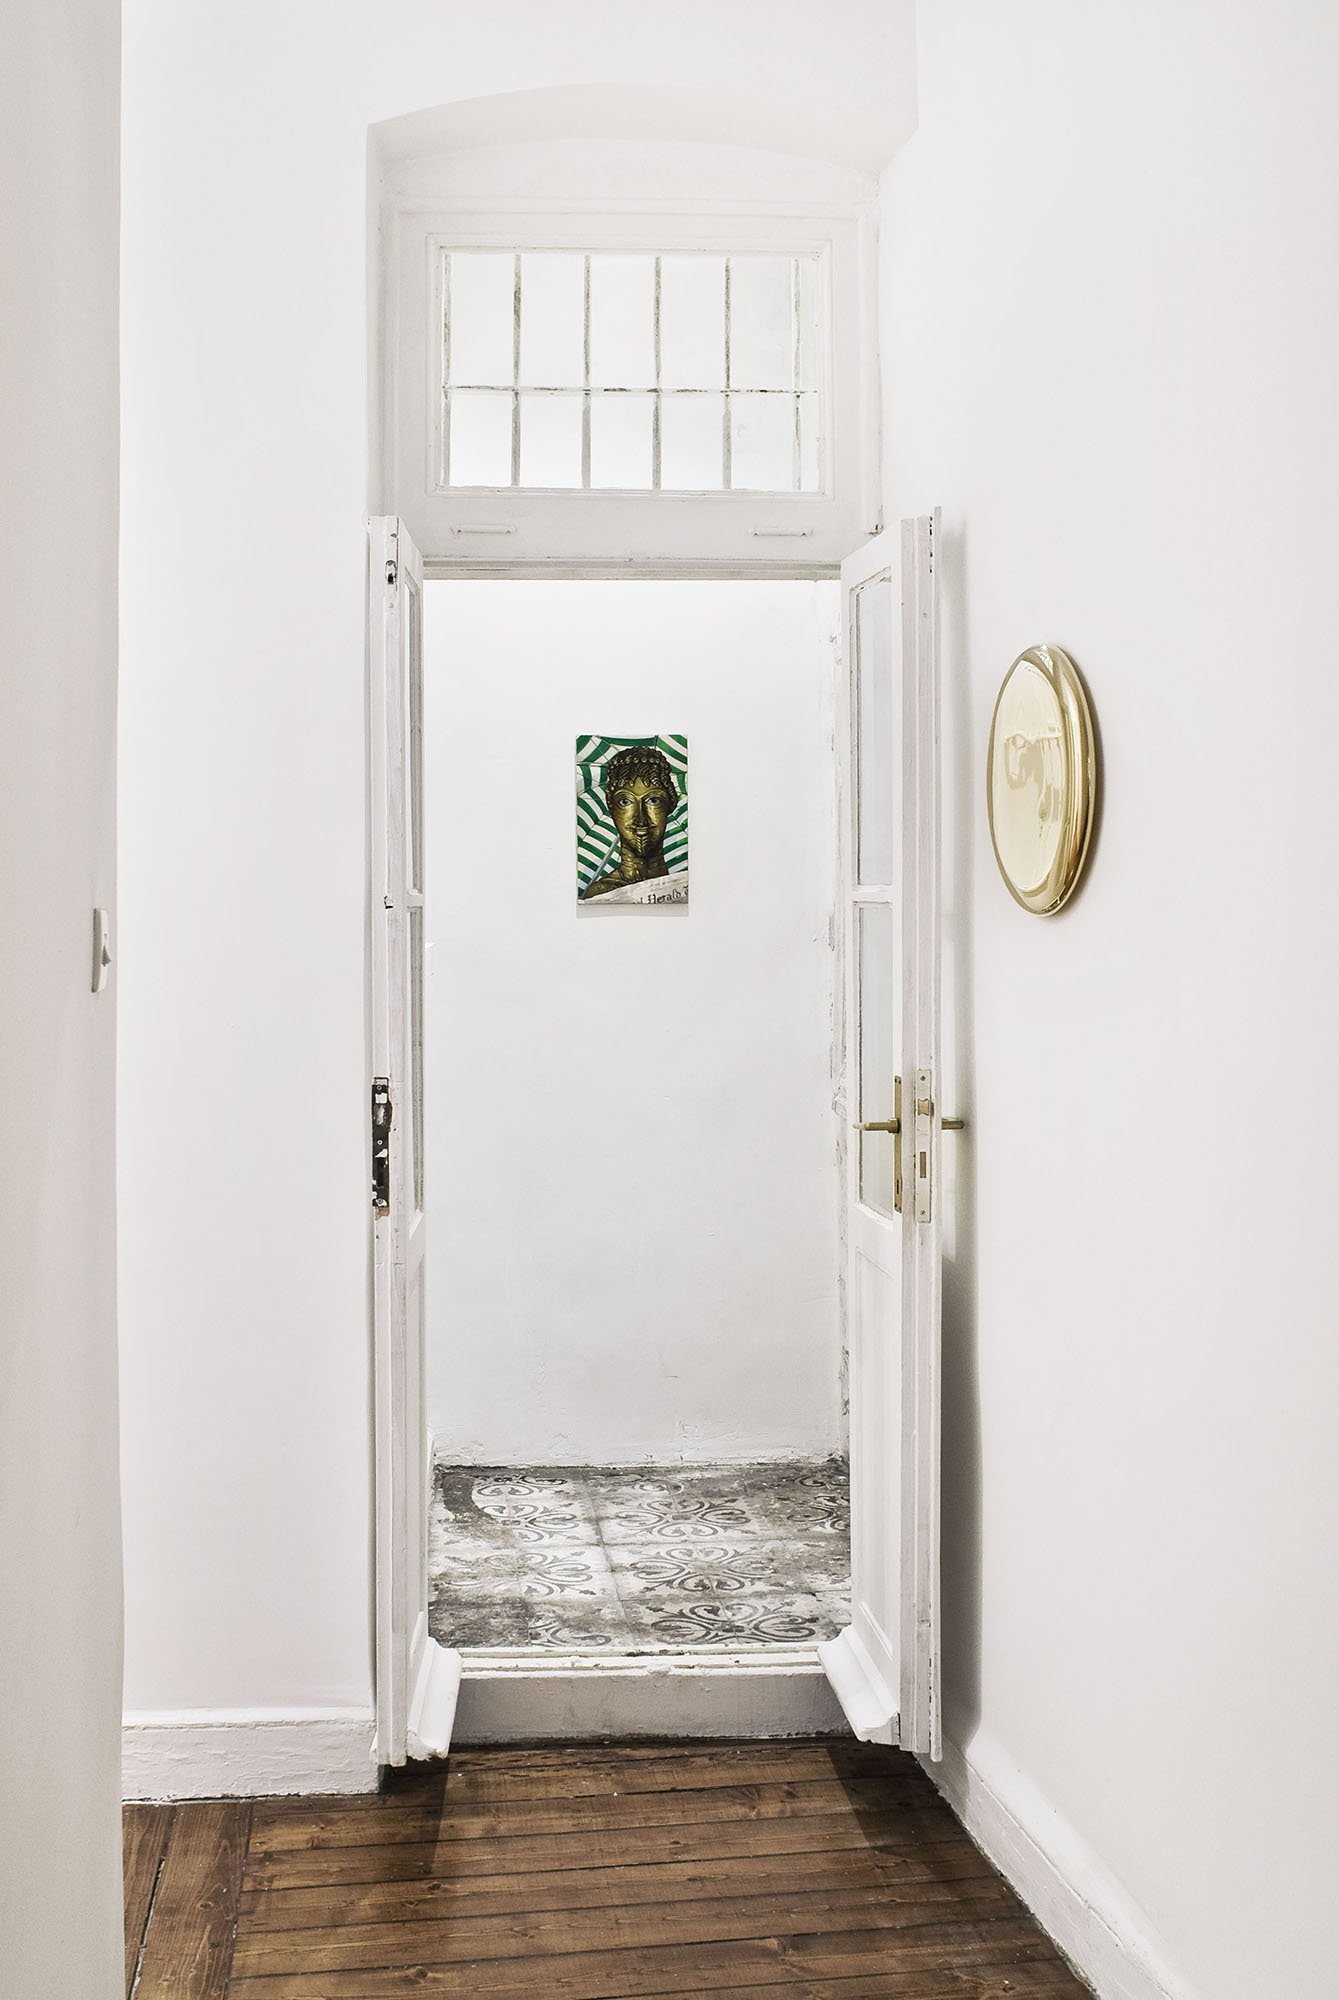 (Centre) Lukas Duwenhögger, Herald, oil on cotton drill, 45 x 29 cm, 1997, 2012; (Right) Michael Anastassiades, Mirror, polished metal, 39 cm (dia.). Installation view, All That Shines Ain’t No Gold, Rodeo, Istanbul, 2012